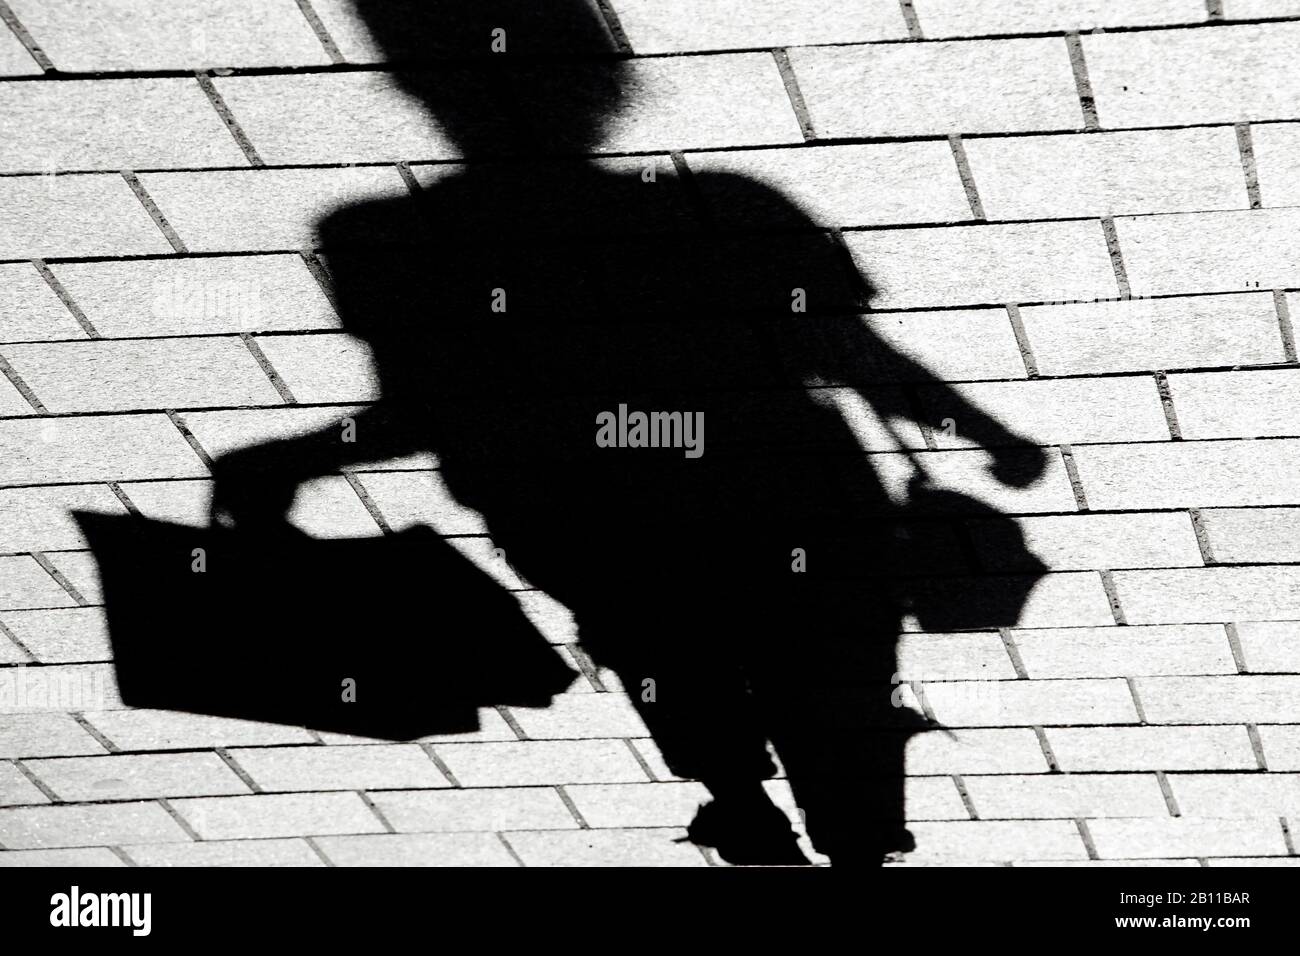 Blurry shadow silhouette of a young woman walking alone on city street sidewalk with shopping bags in high contrast black and white, upside down Stock Photo